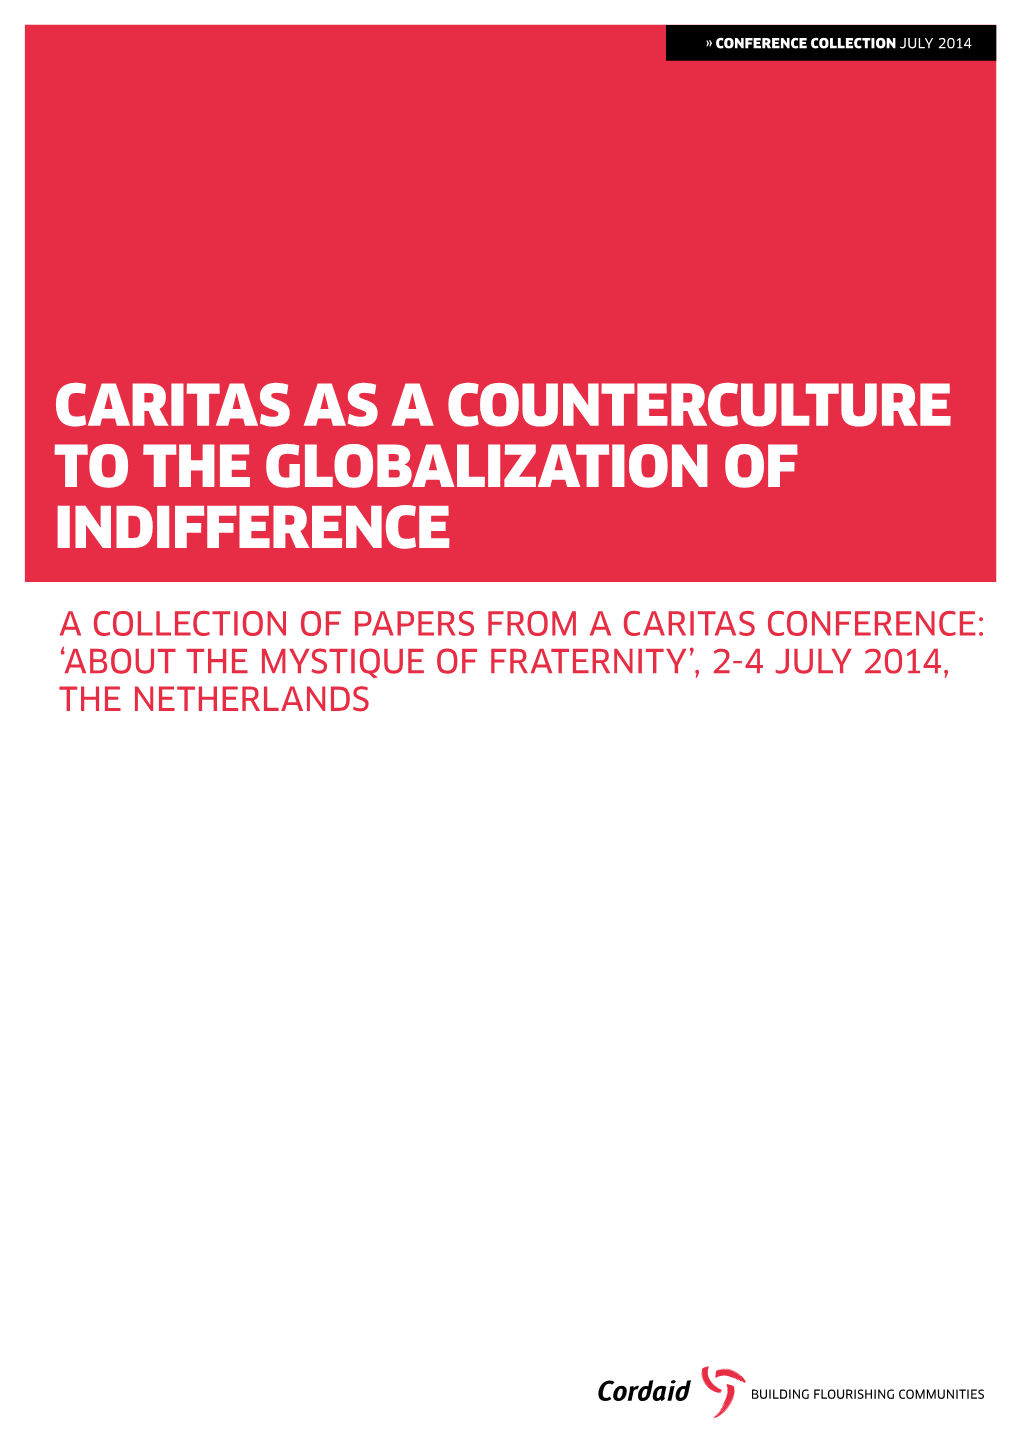 Caritas As a Counterculture to the Globalization of Indifference